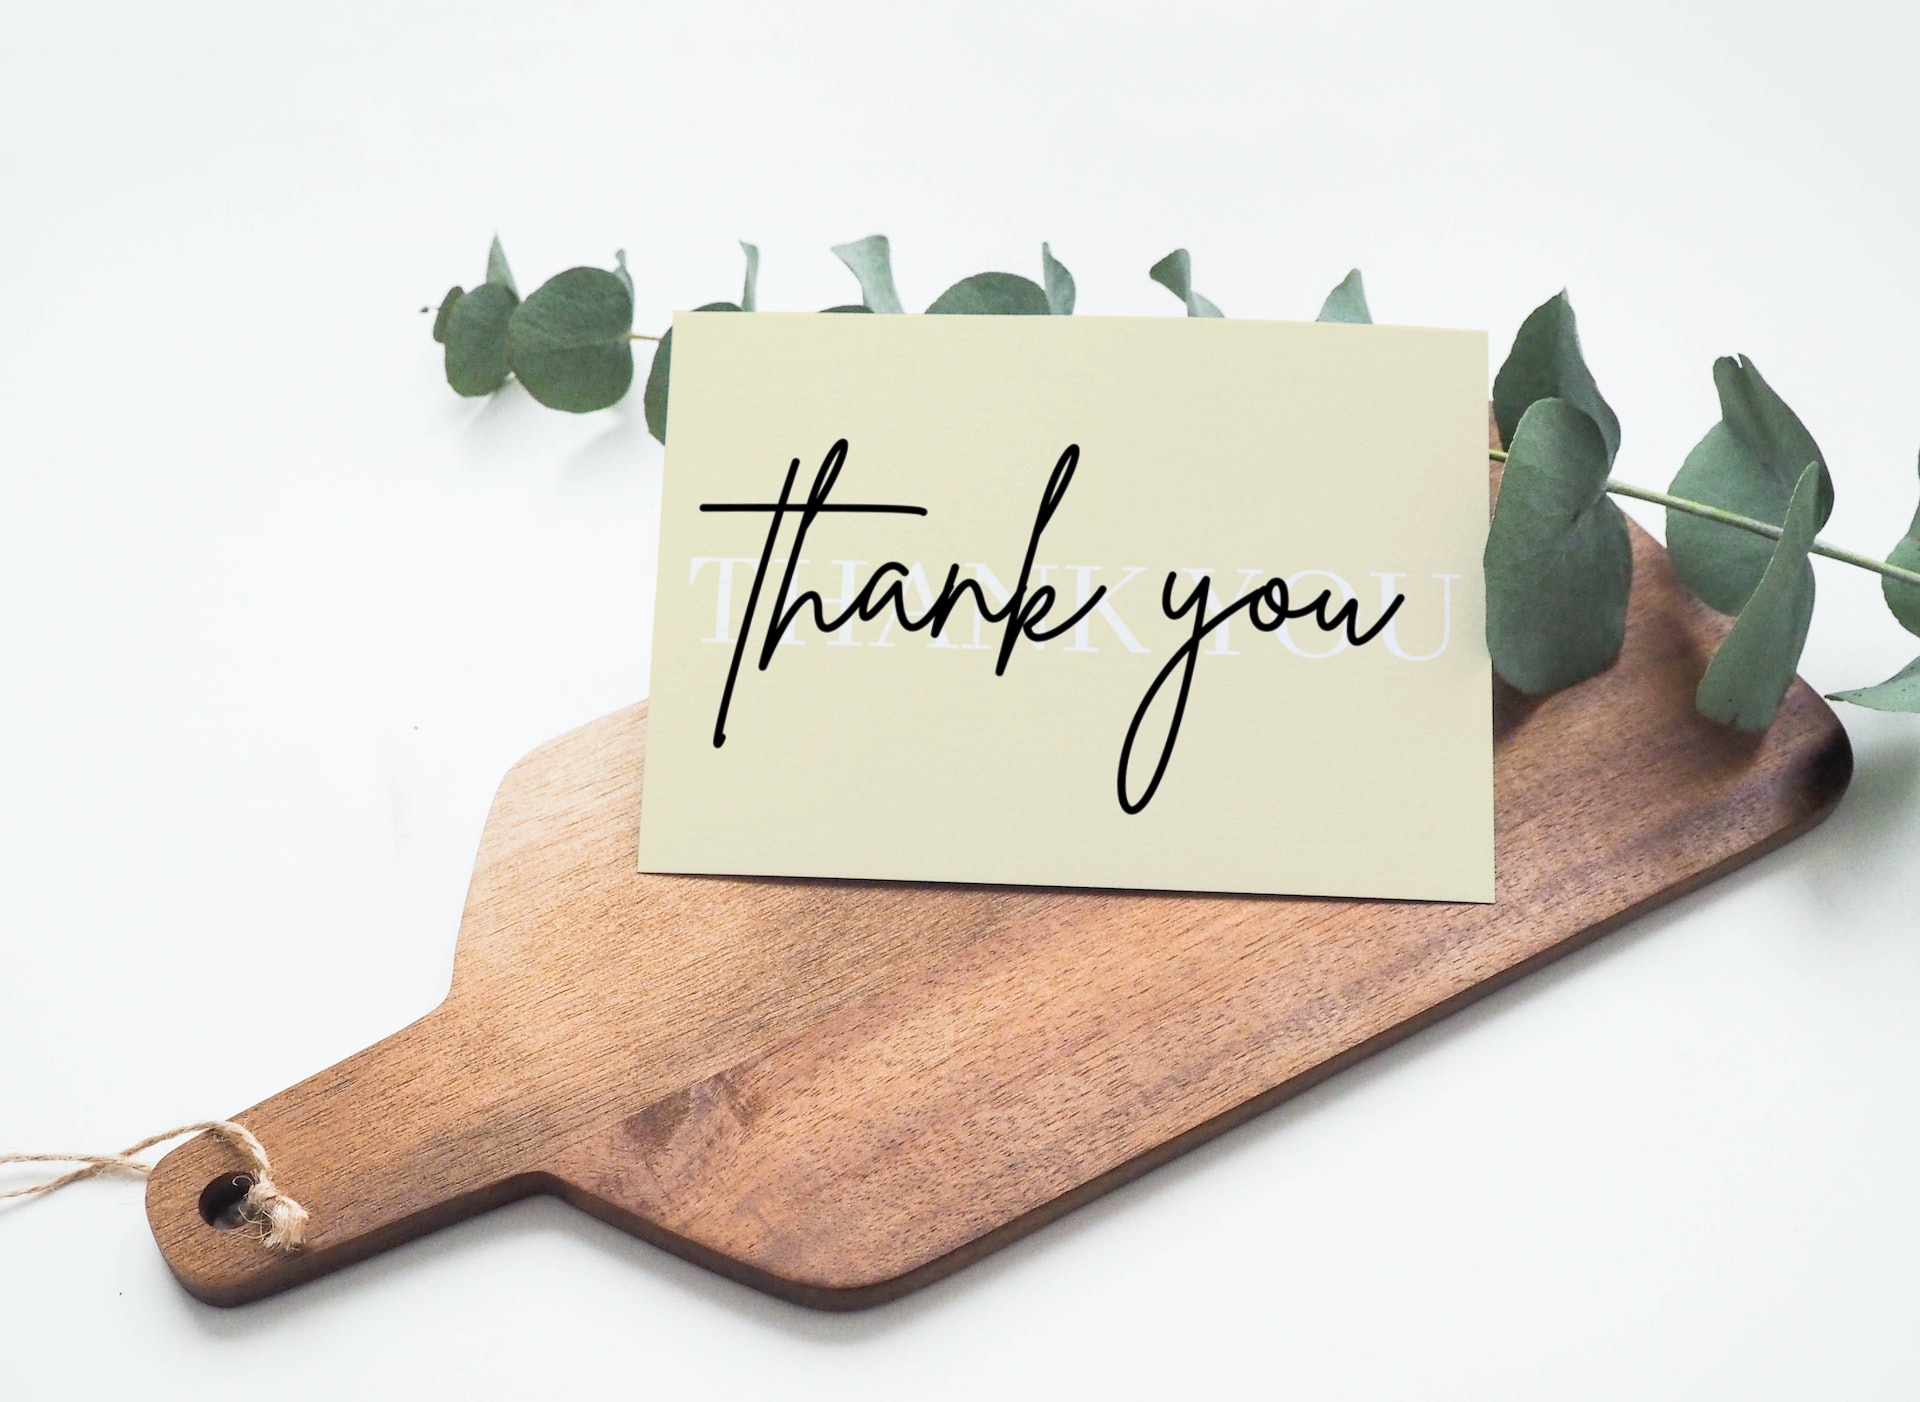 Thank You Card From Realtor To Seller After Closing - Design 7 (with greeting)